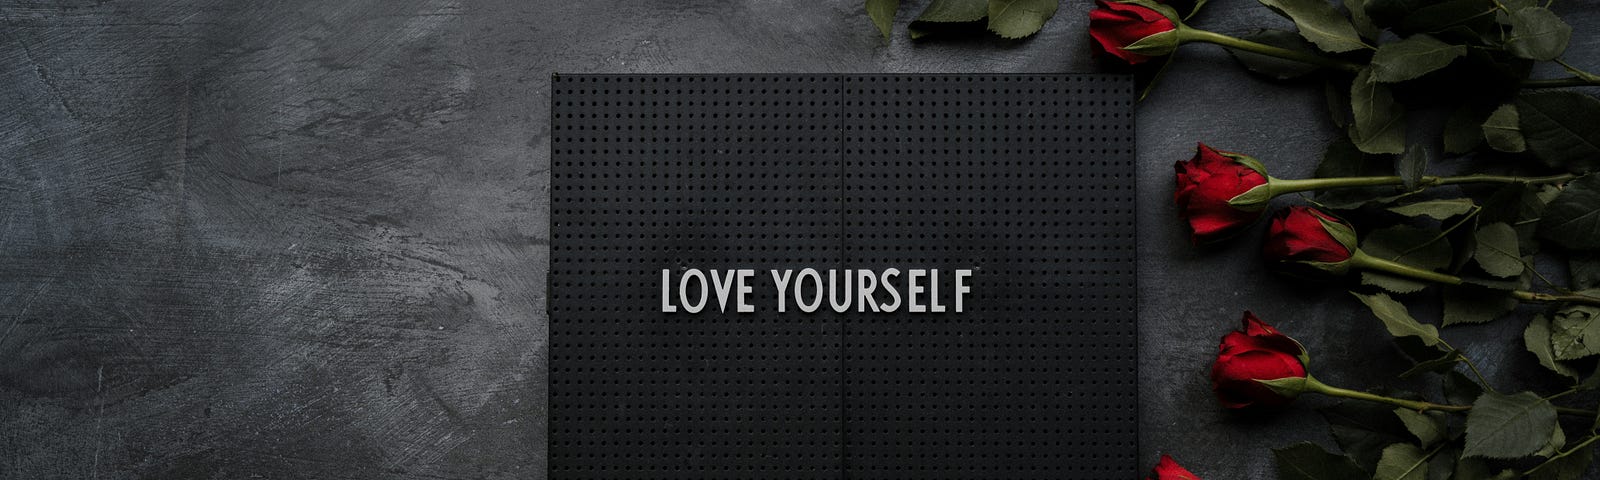 Start loving yourself, and it will turn it into you accepting who you are.